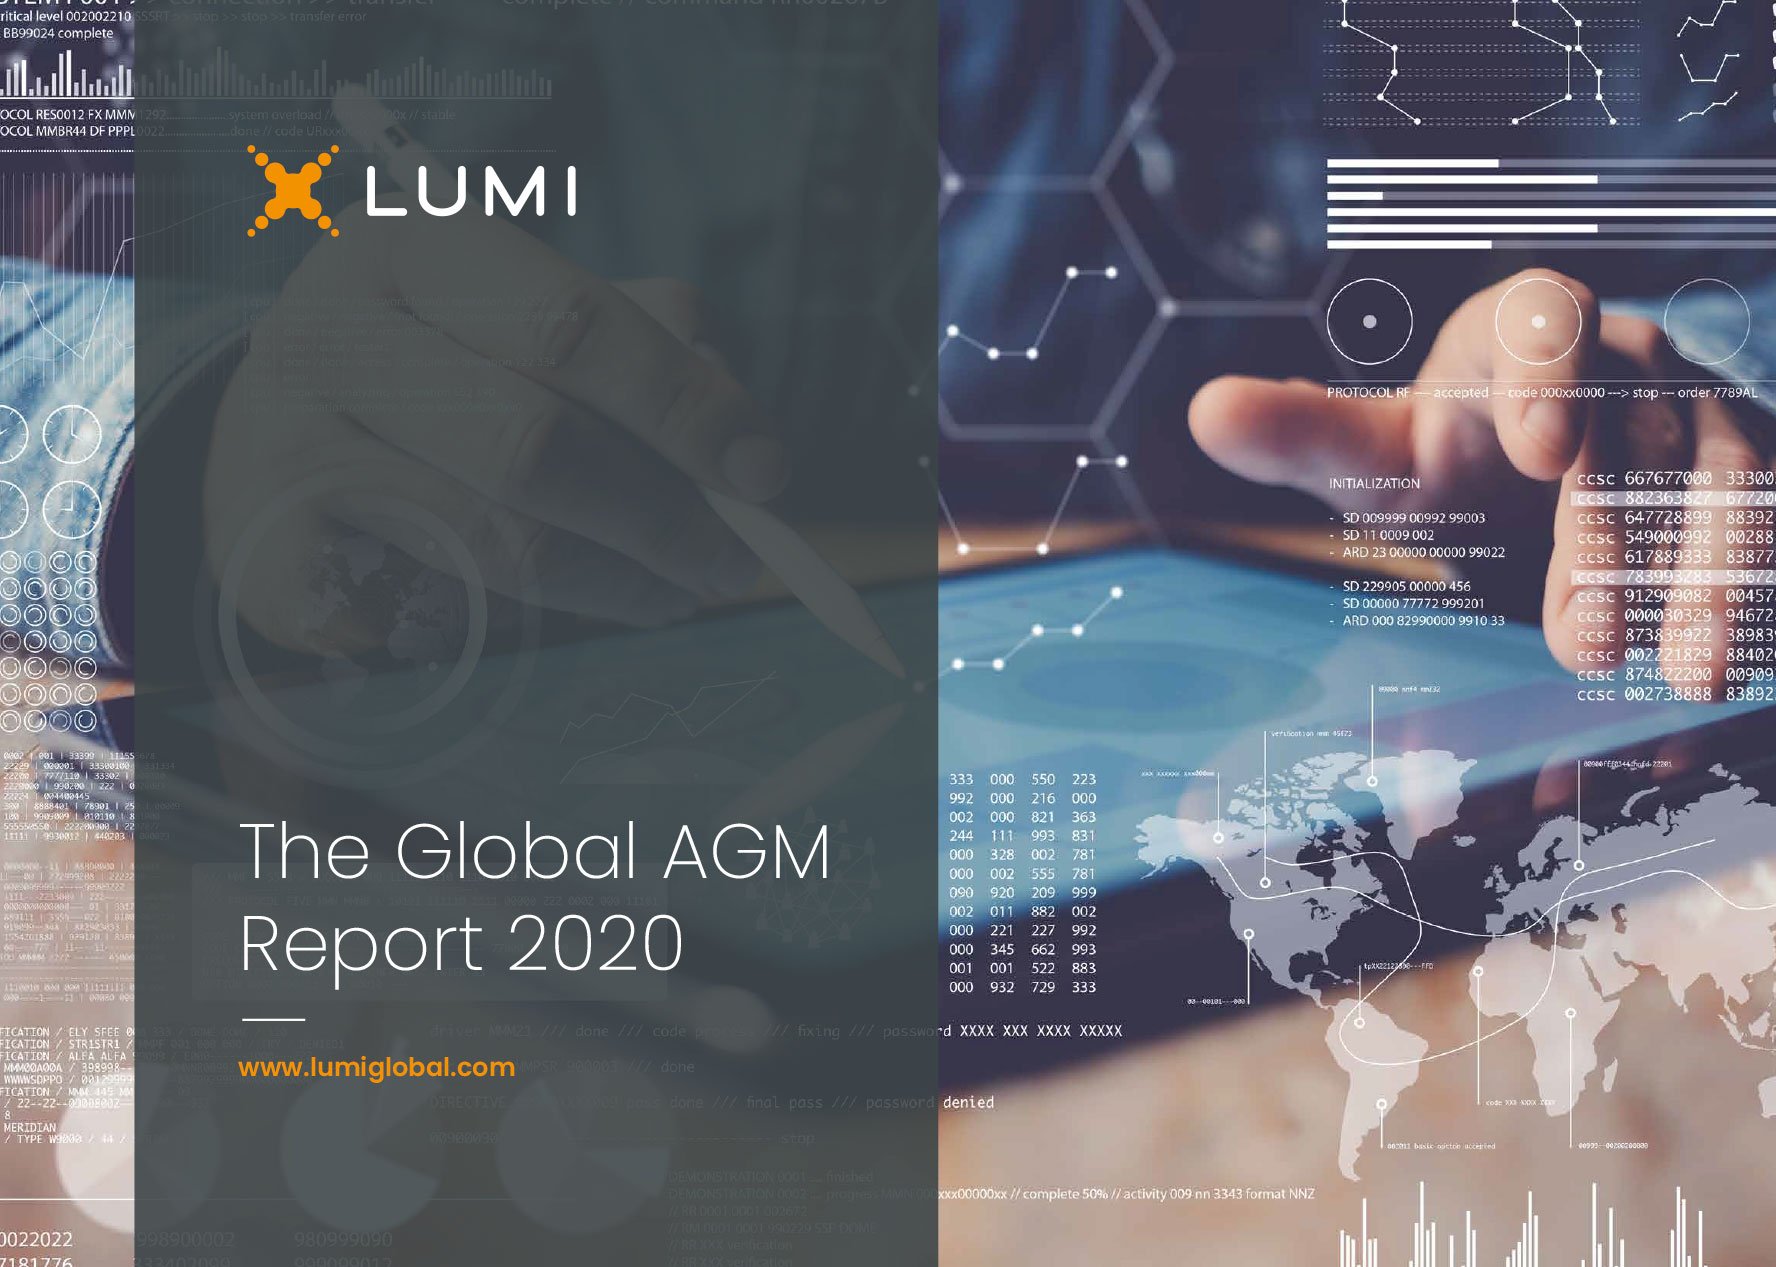 The Global AGM Report 2020